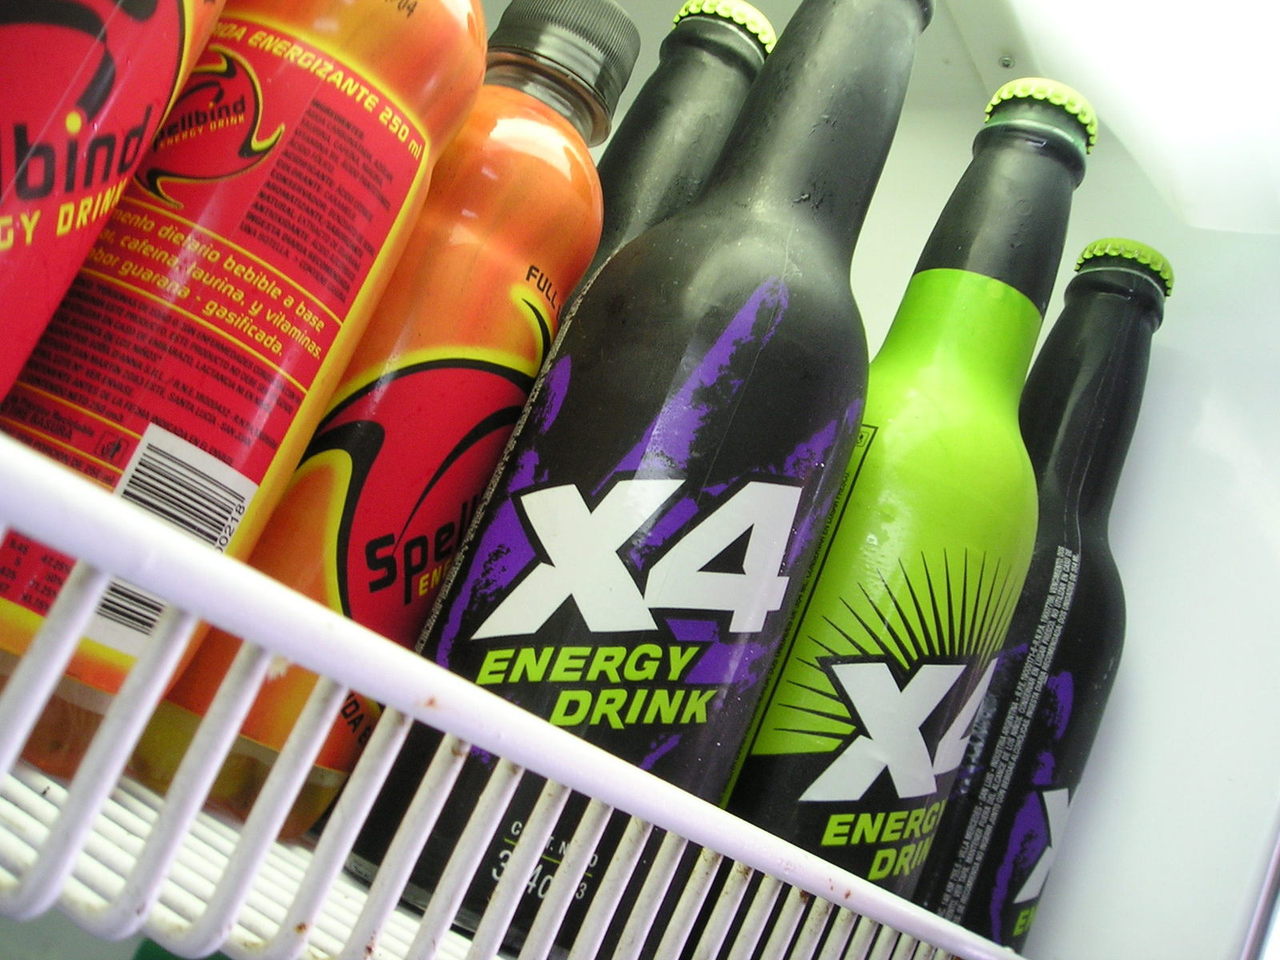 safety issues associated with commercially available energy drinks